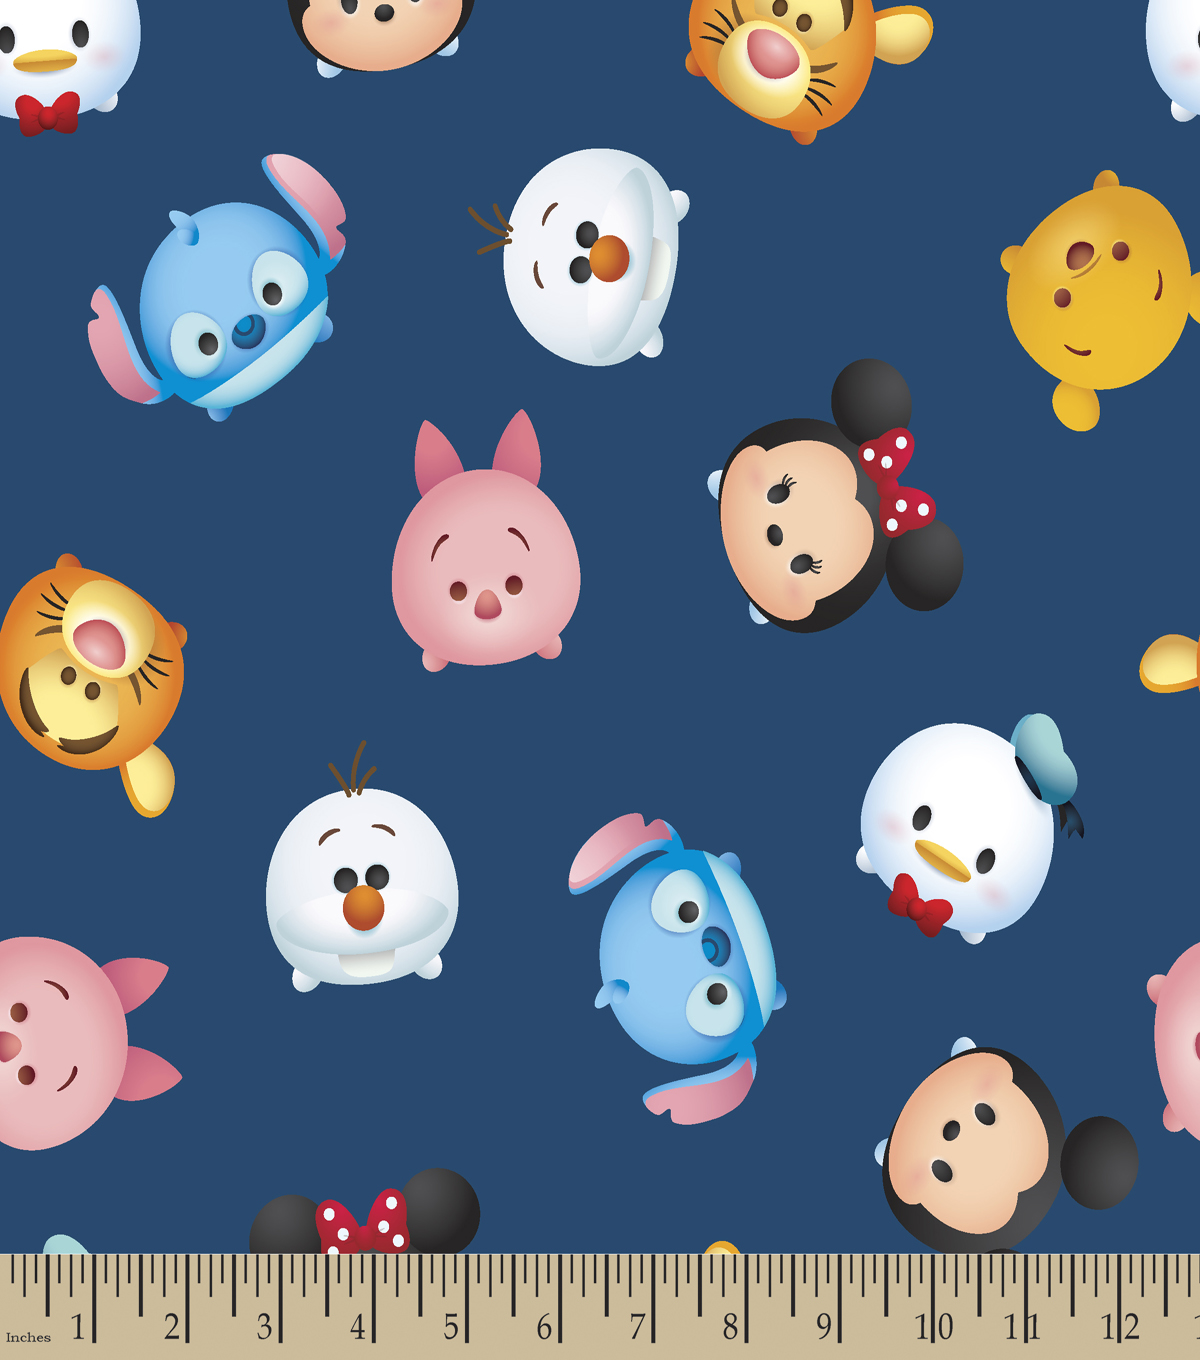 Star Wars Clipart Tsum Tsum - Mickey Mouse Tsum With A Blue Background - HD Wallpaper 